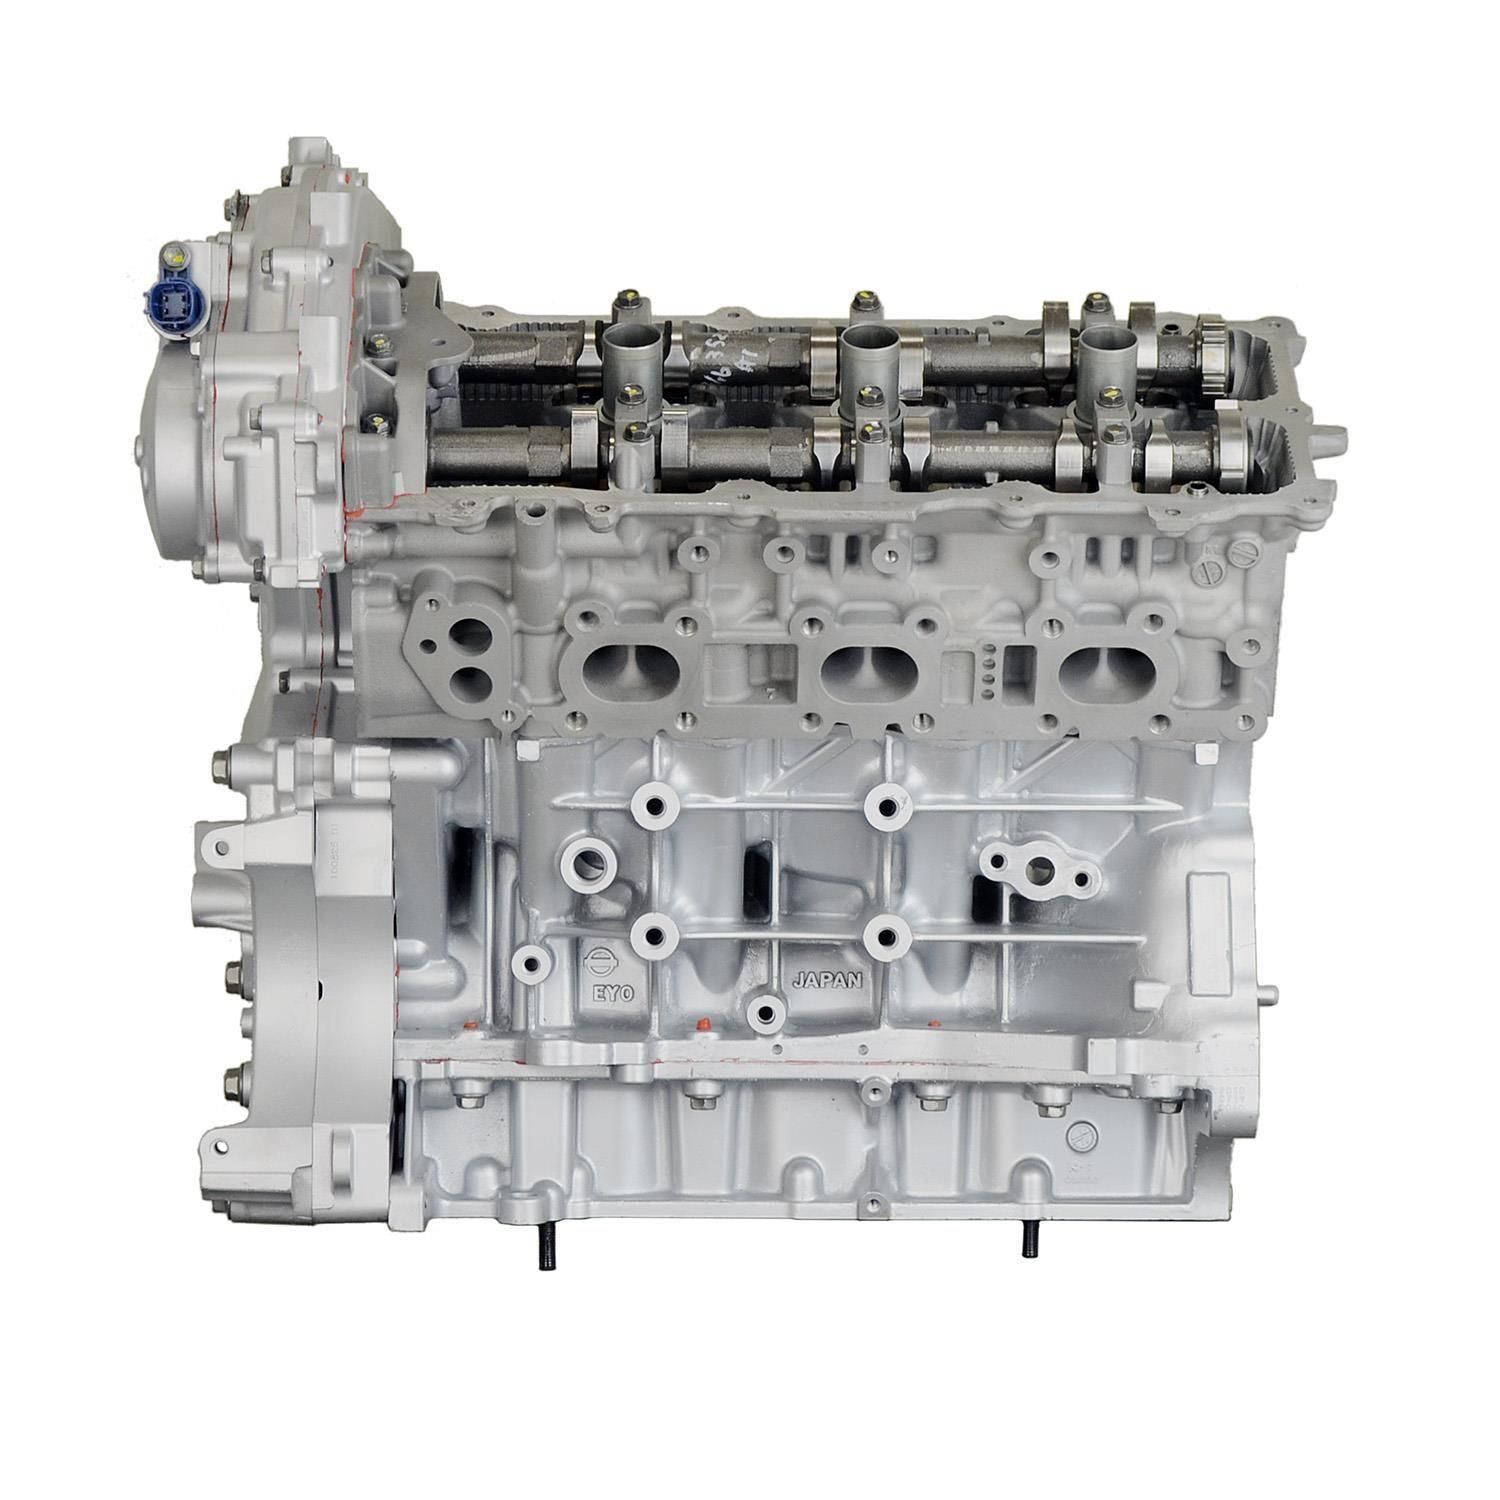 NuTech Remanufactured Long Block Engine 352